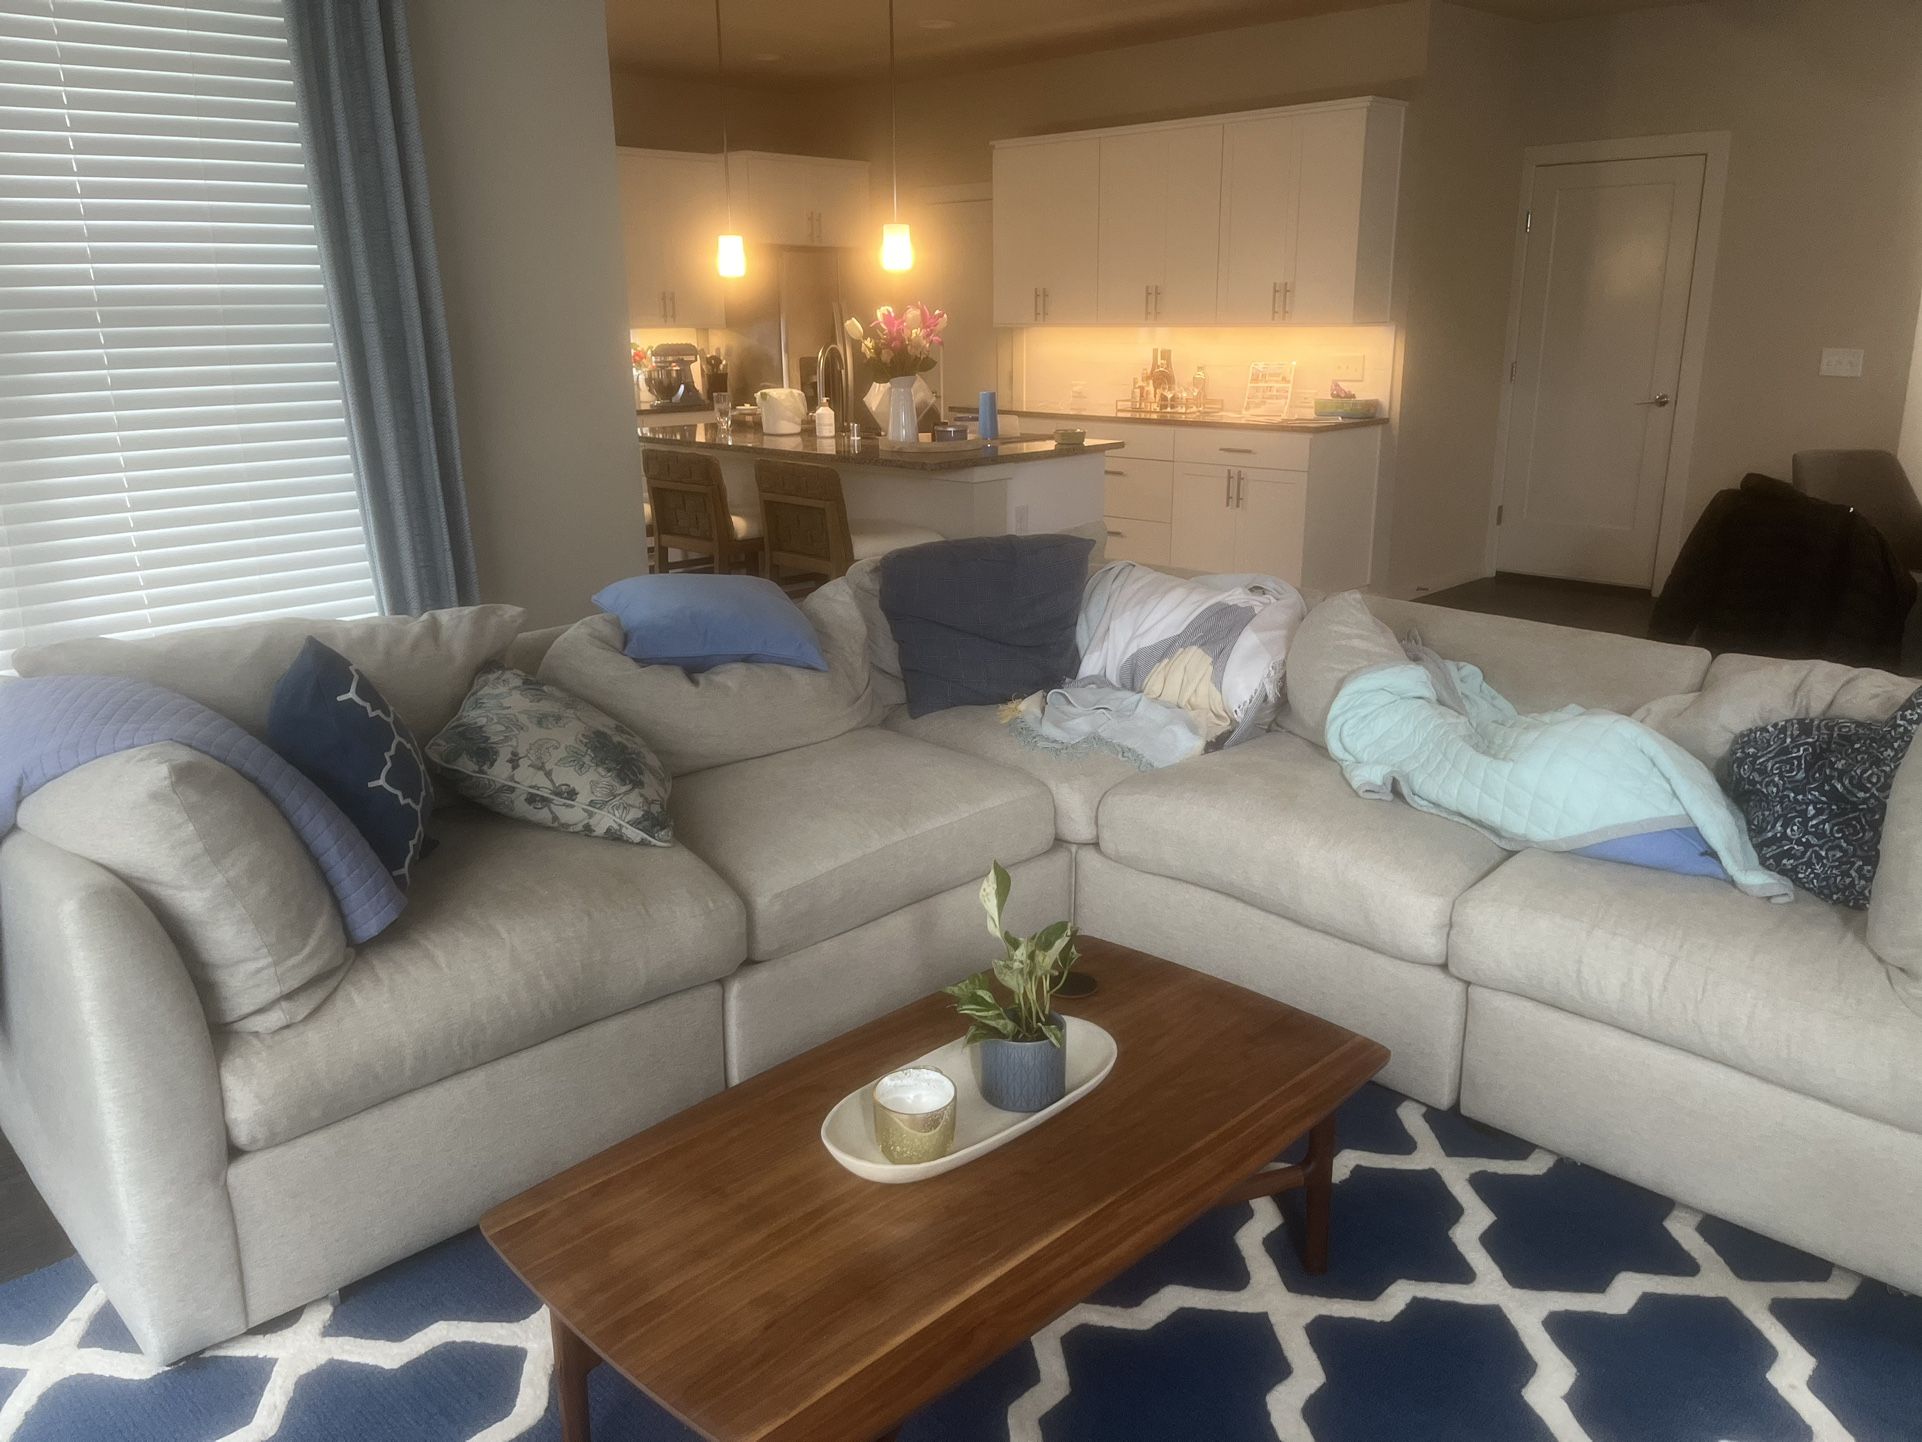 Sectional couch - $50, Must Pick Up Between 5/5-5/8